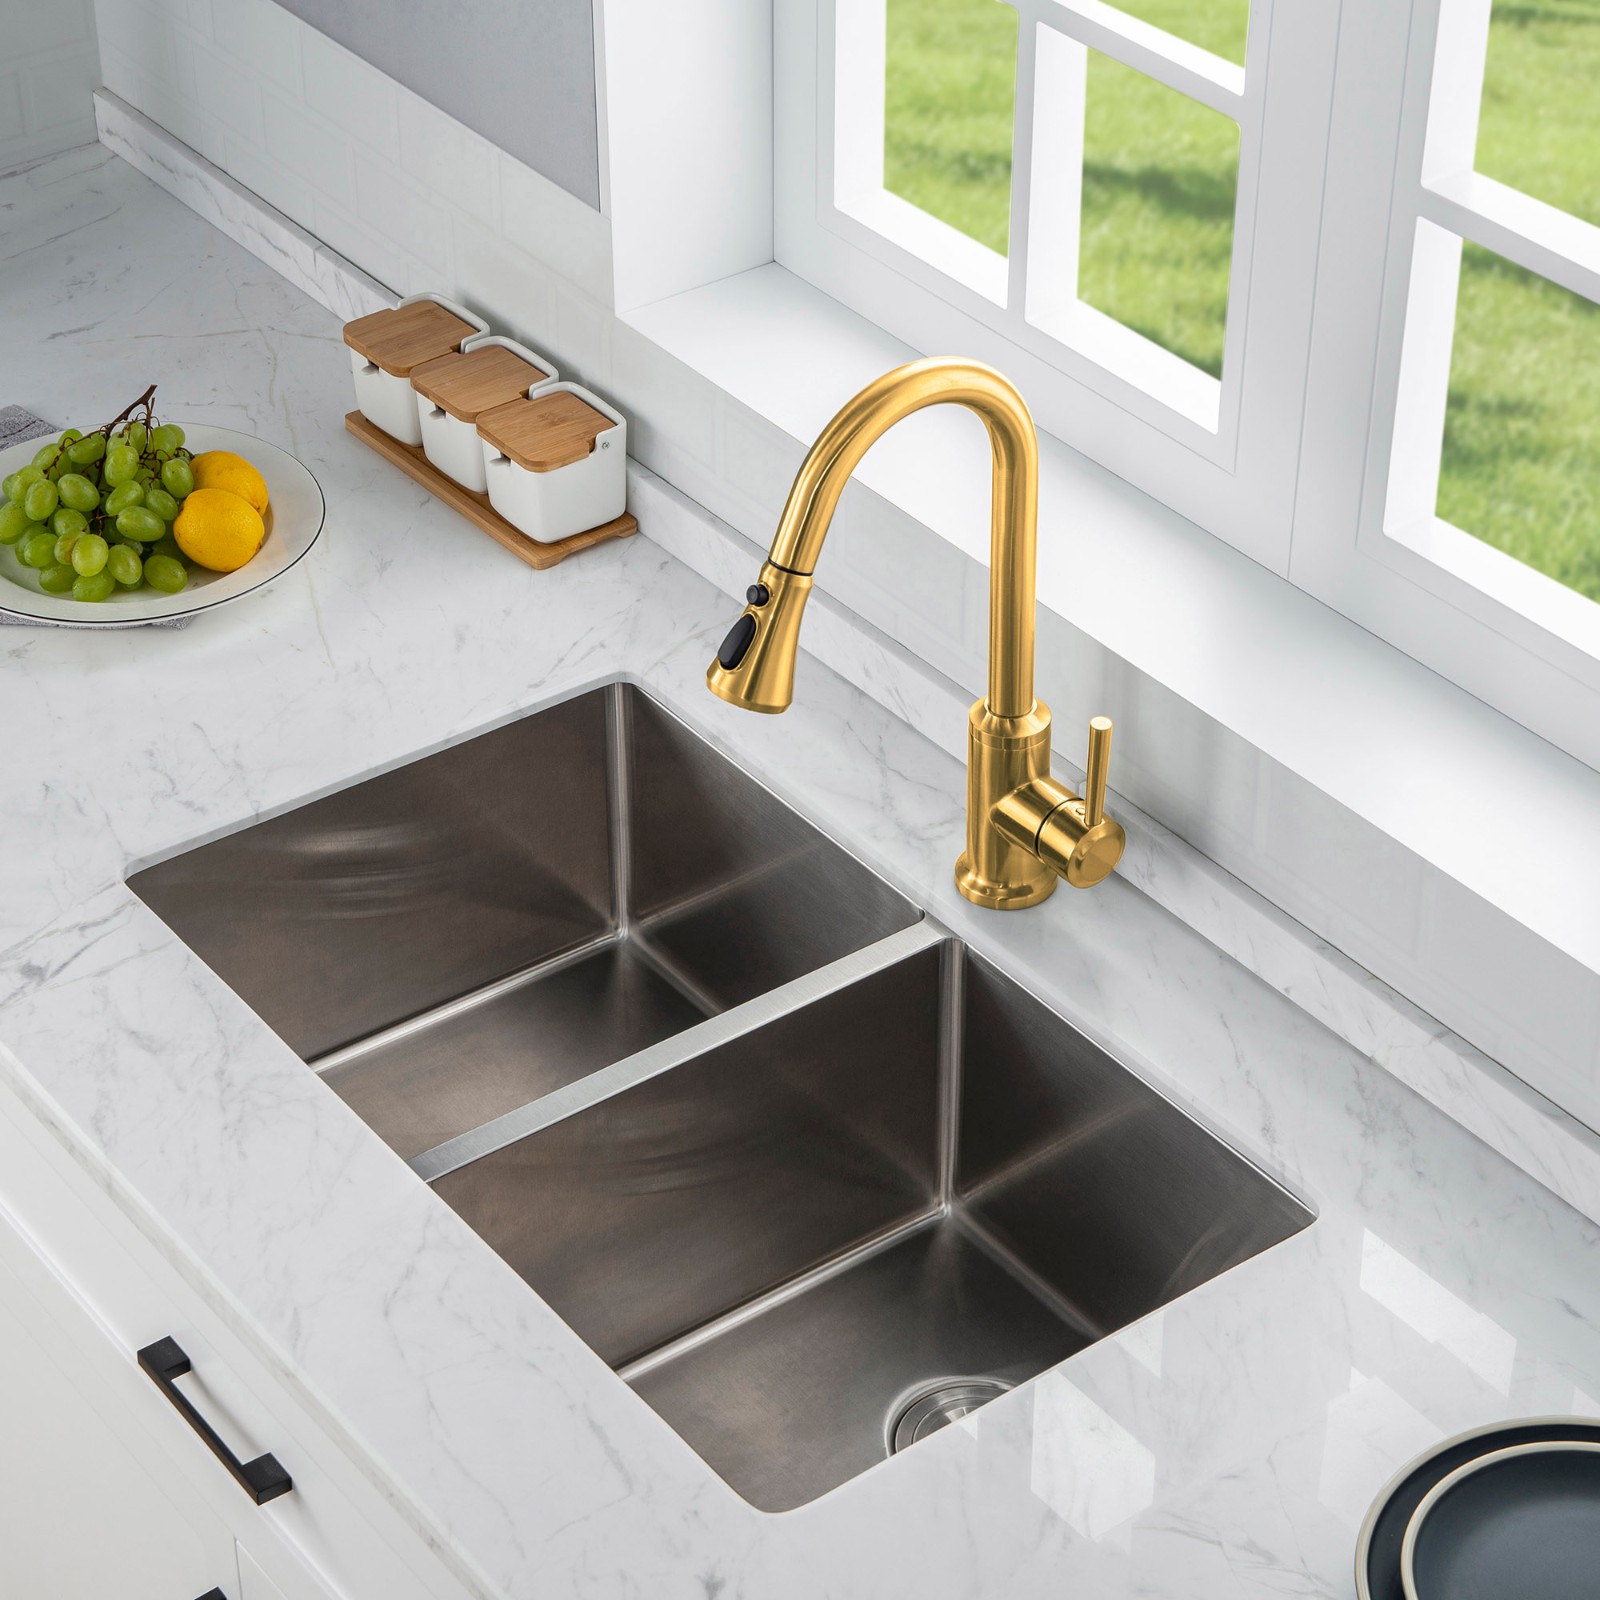  WOODBRIDGE WK101201BG Stainless Steel Single Handle Pull Down Kitchen Faucet in Brushed Gold Finish._4991